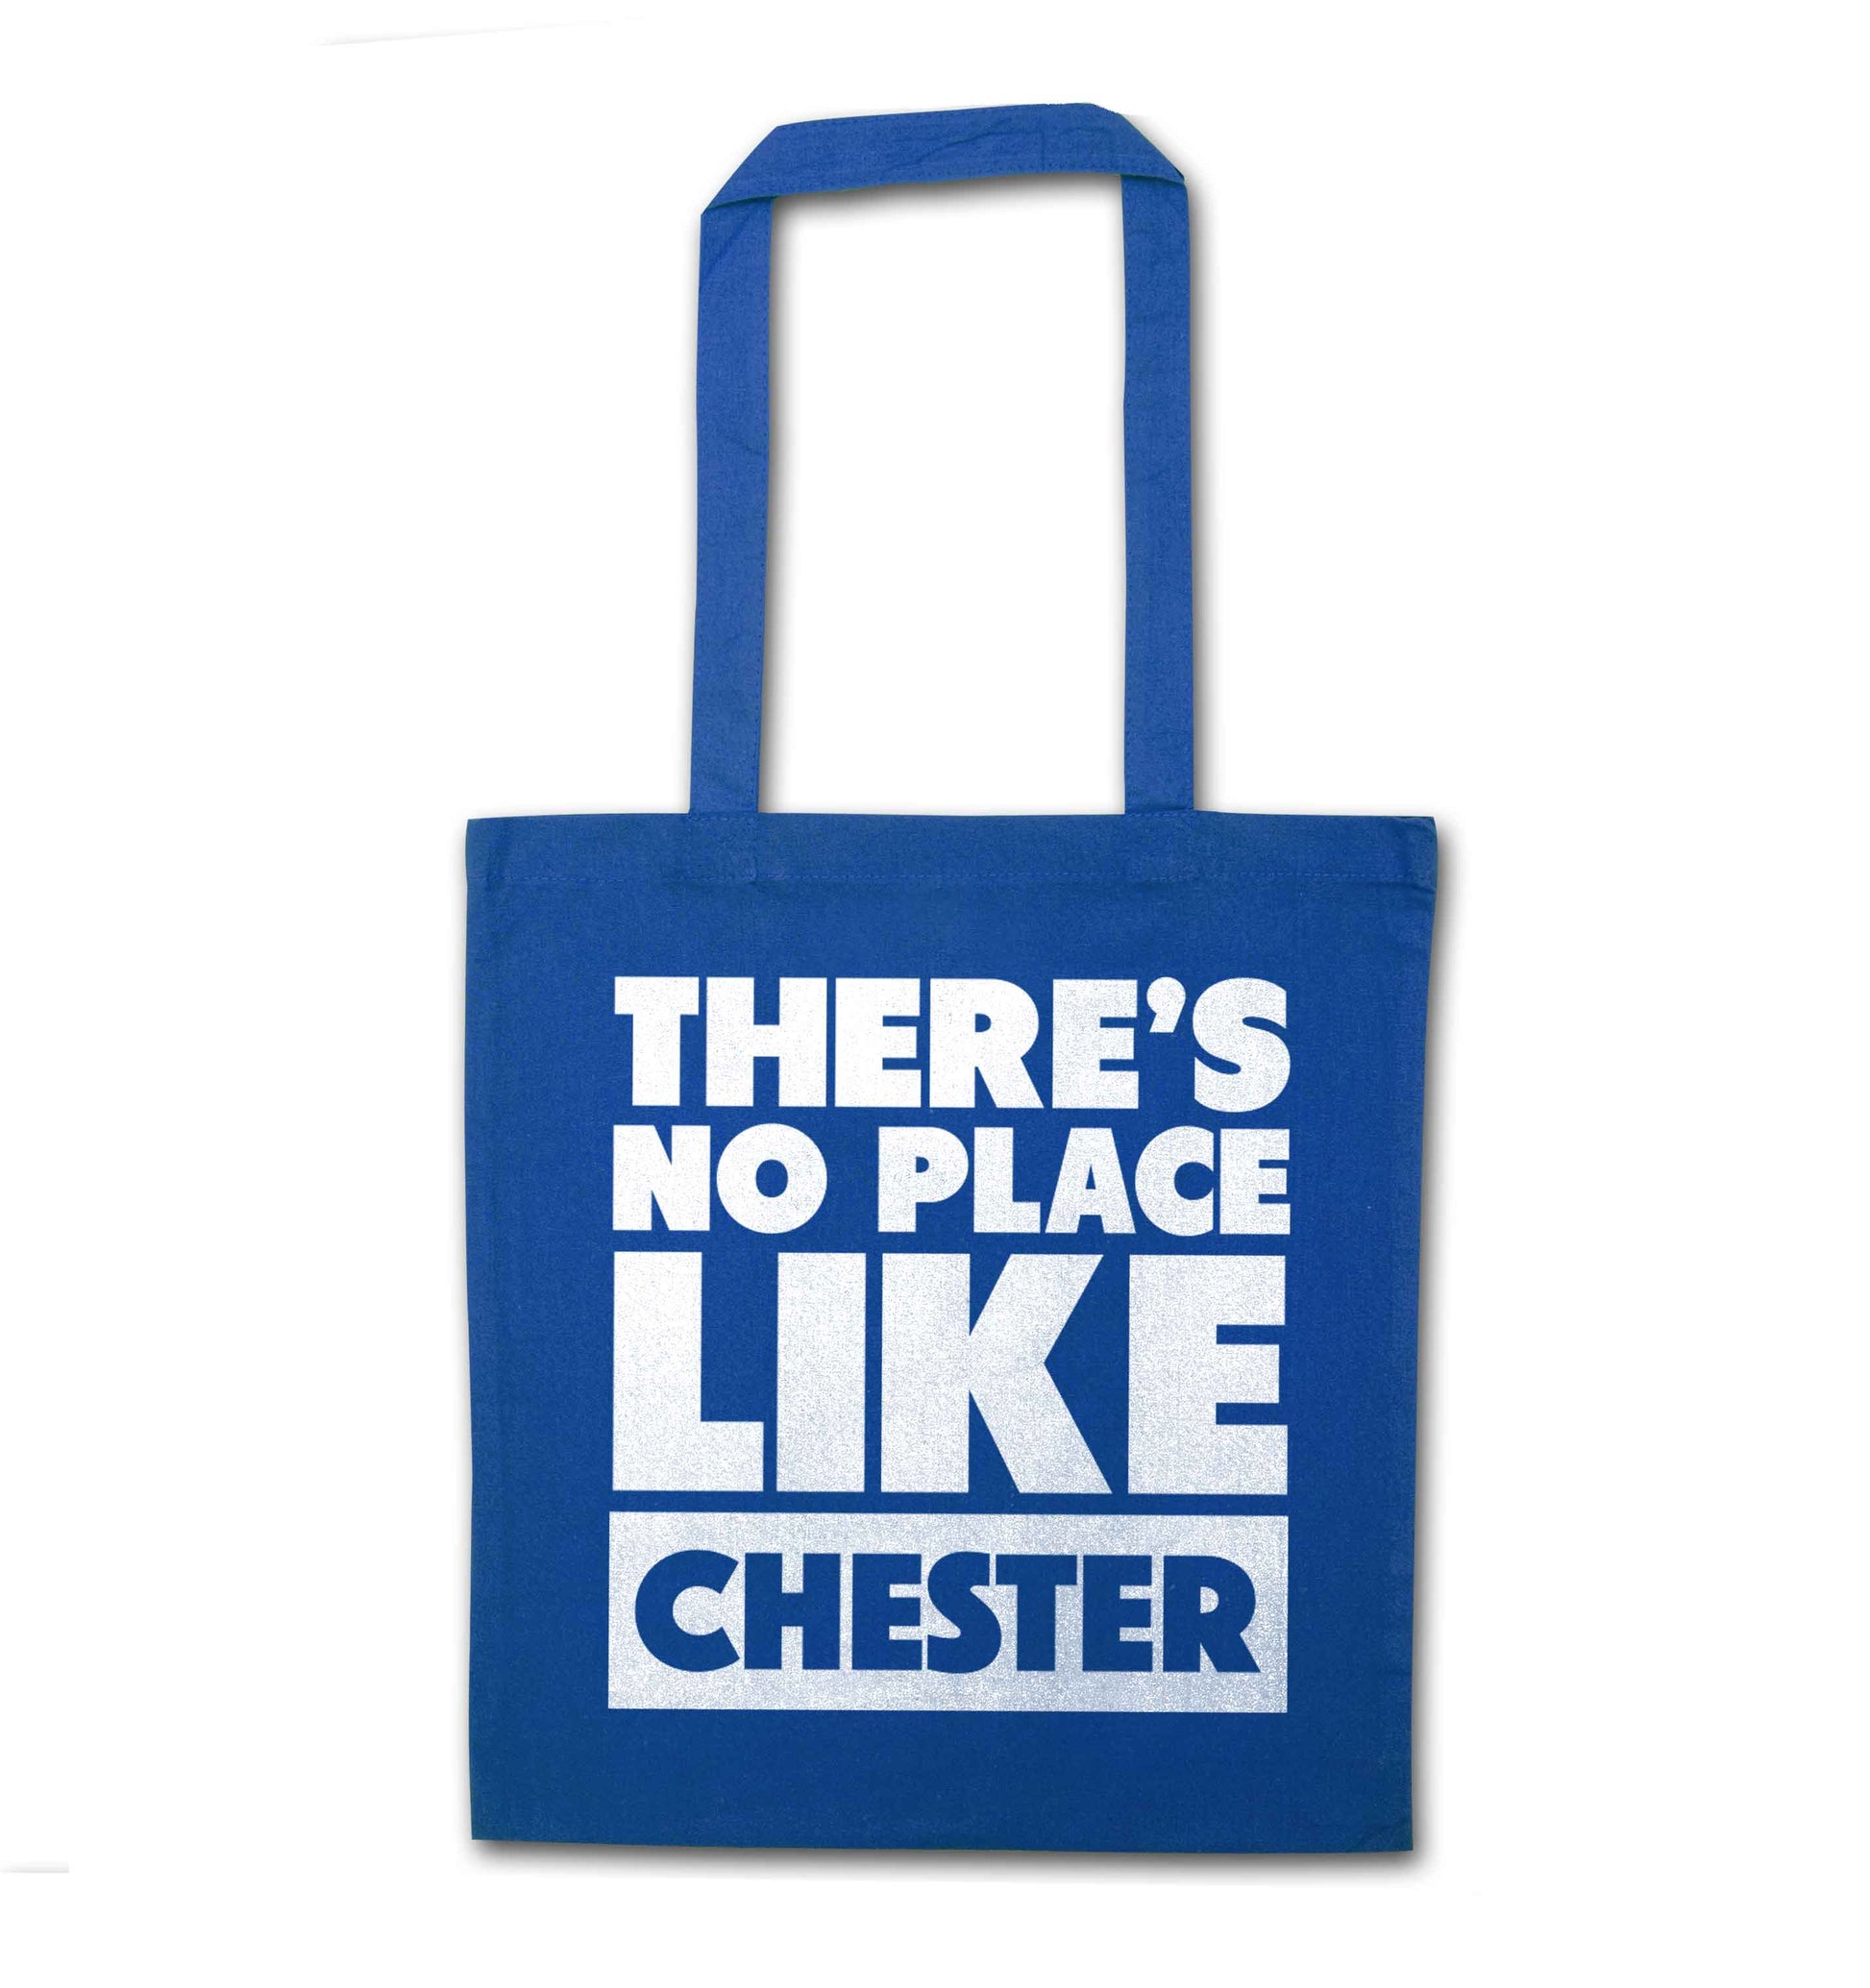 There's no place like Chester blue tote bag